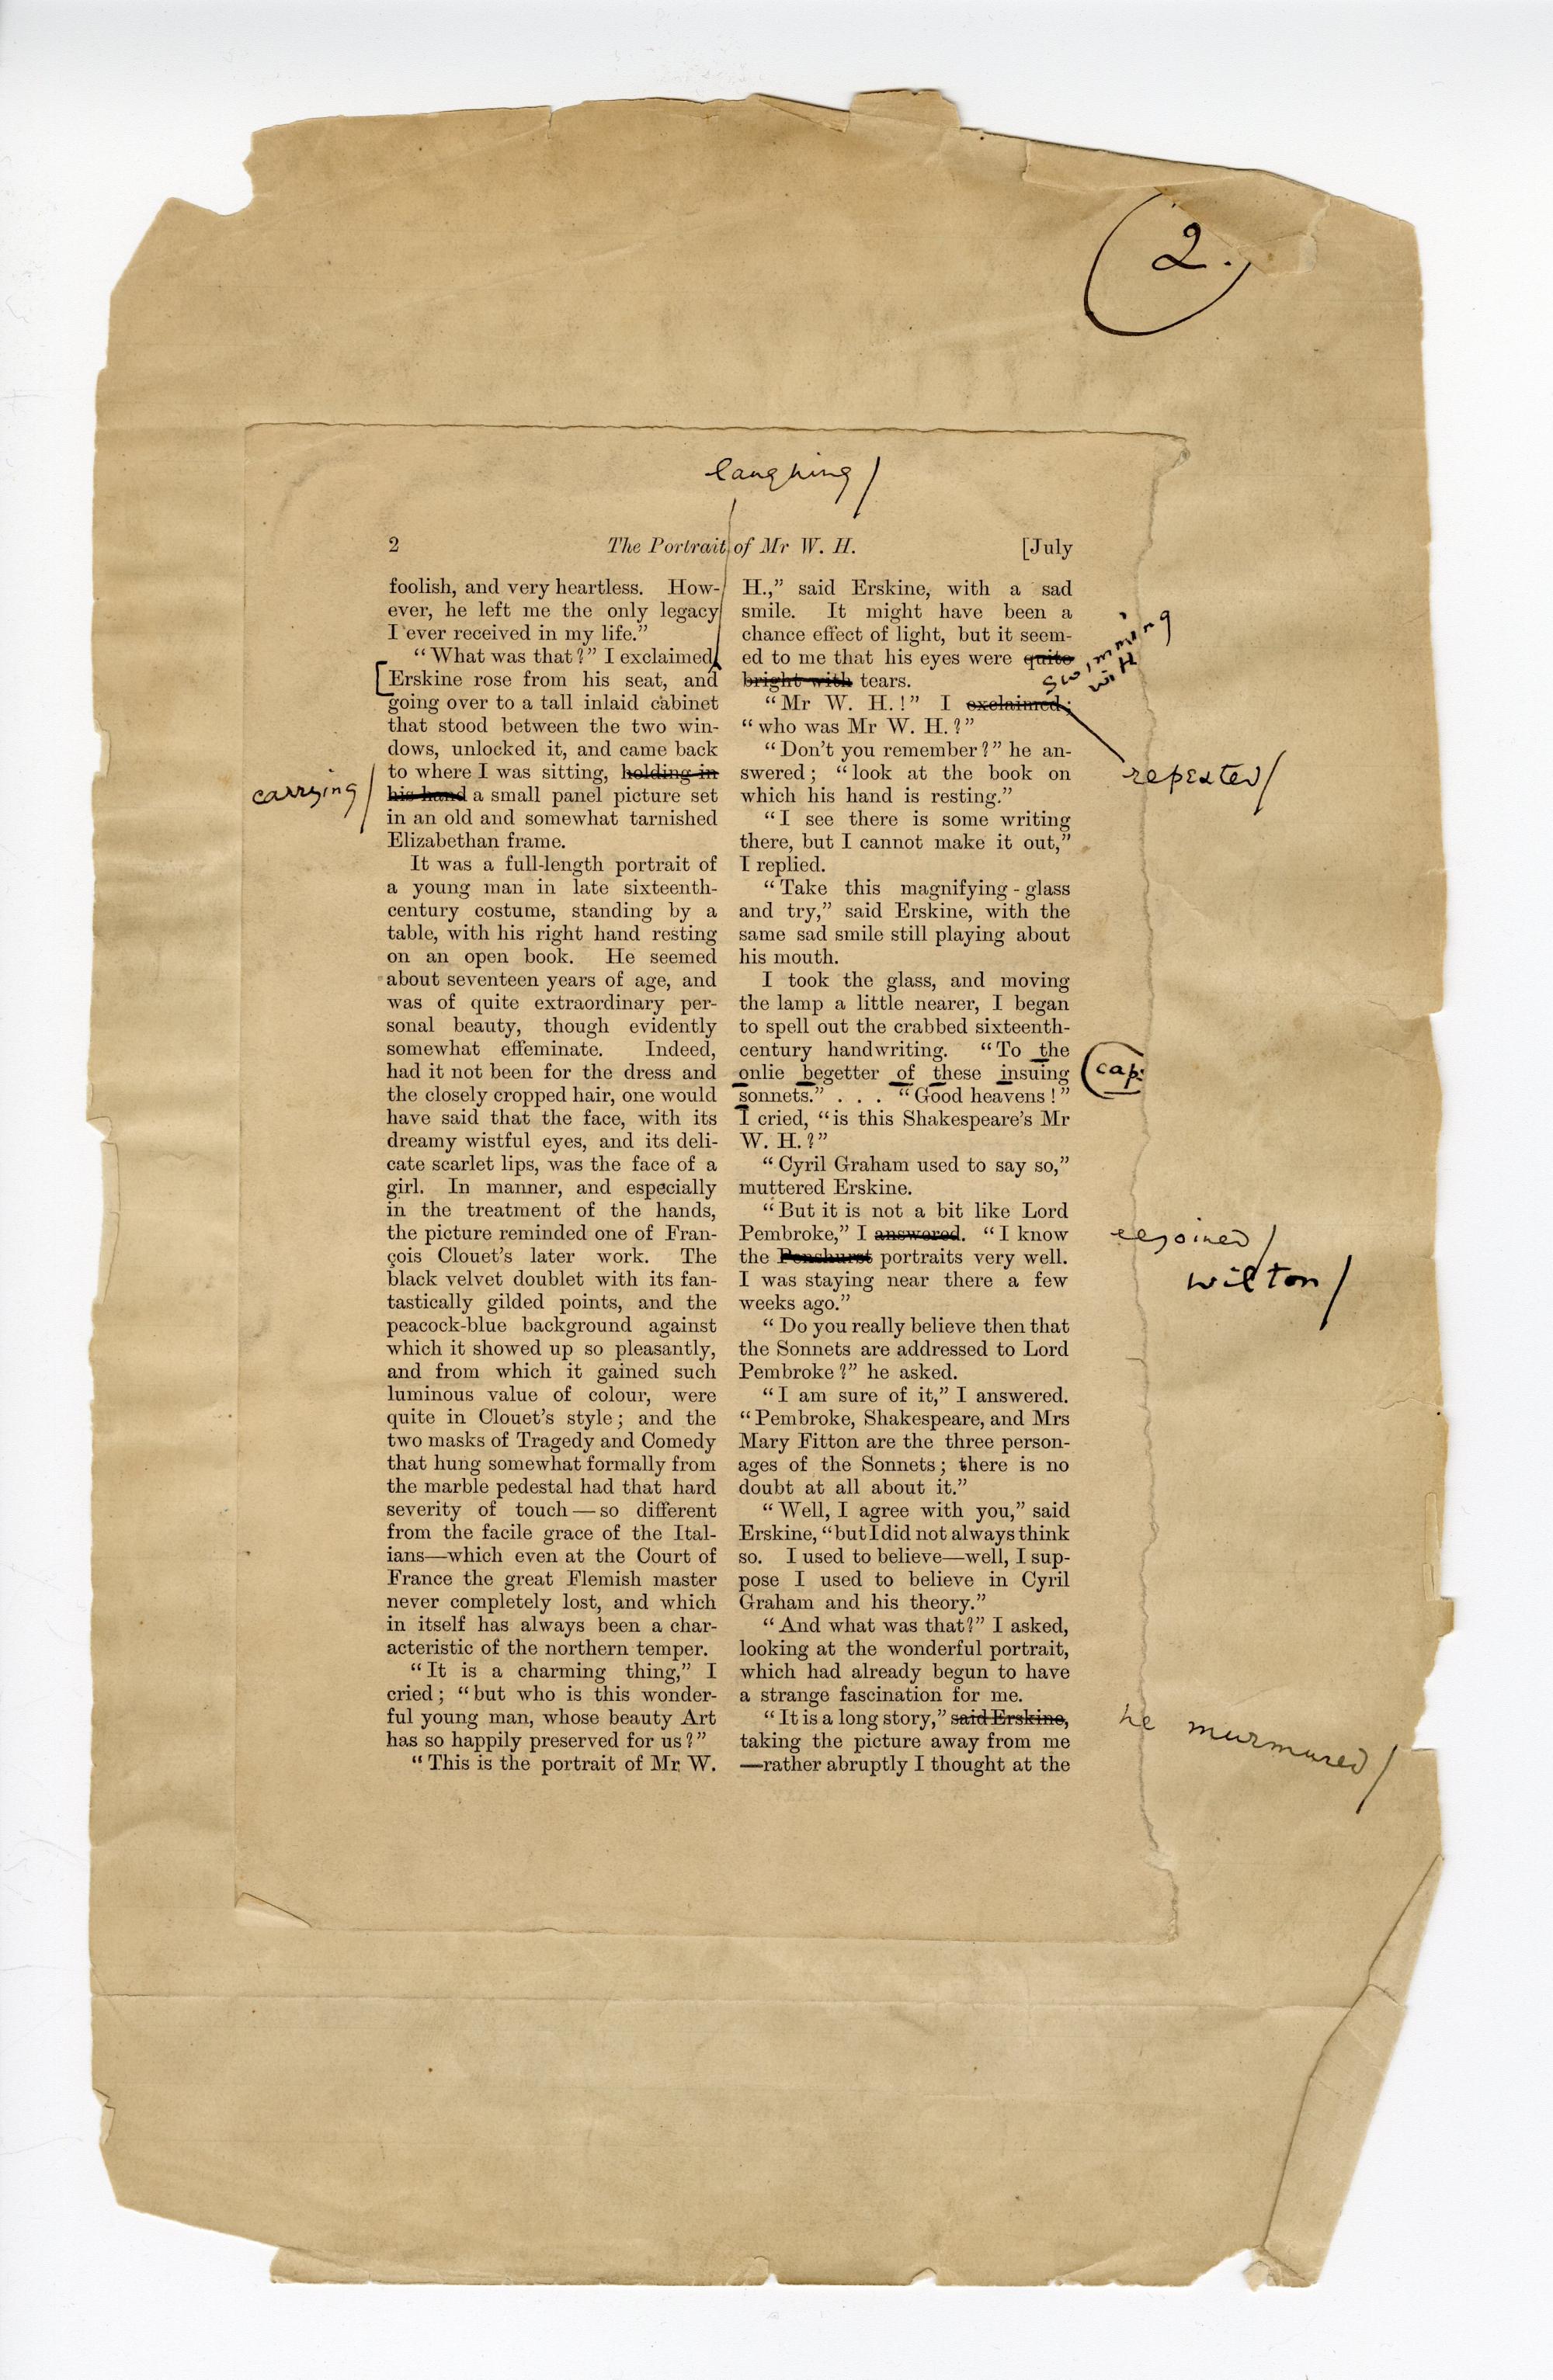 Folio 2, full page of Blackwood's p.2 with annotations in Wilde's handwriting, some going into the margins of the notebook page which it is glued on.